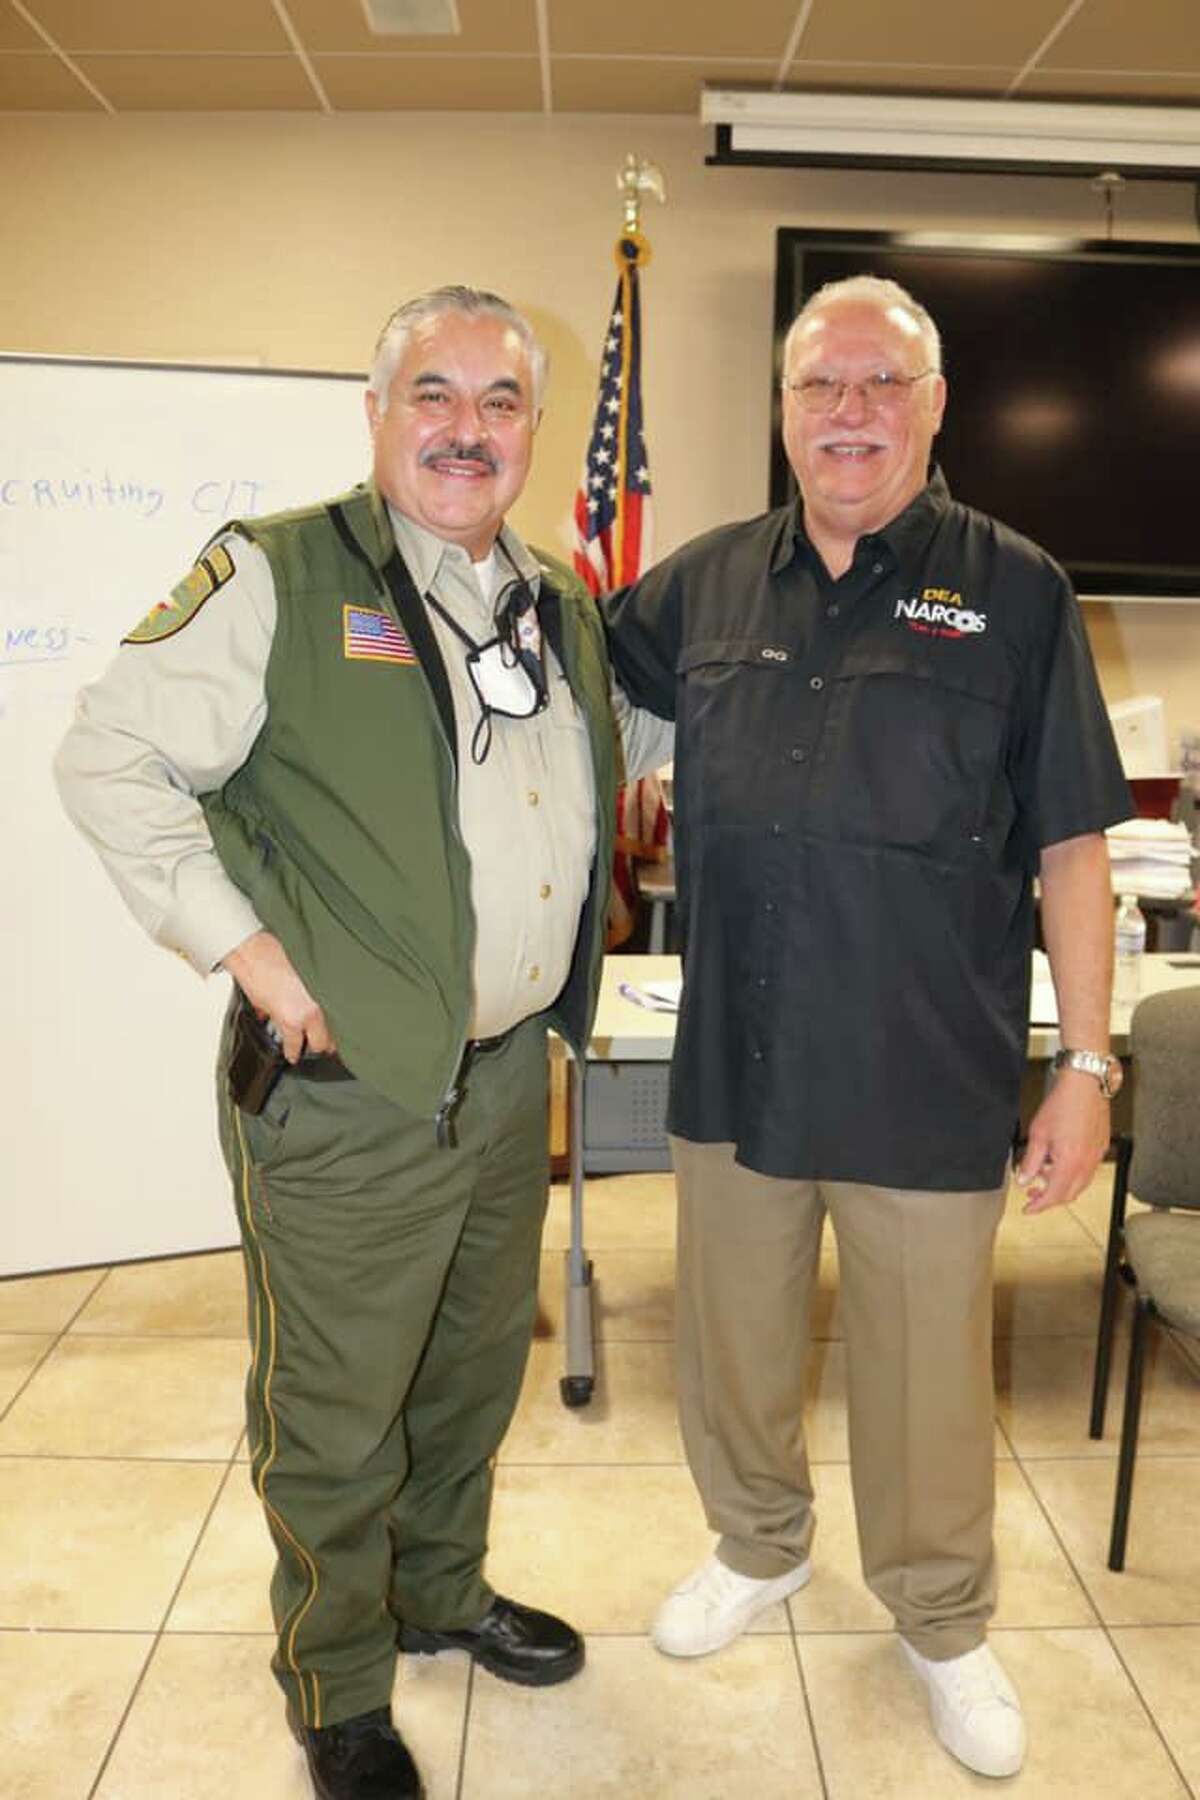 Sheriff Martin Cuellar hosted Peña on Tuesday as he spoke to law enforcement about his experience with the capture of drug lord Pablo Escobar.